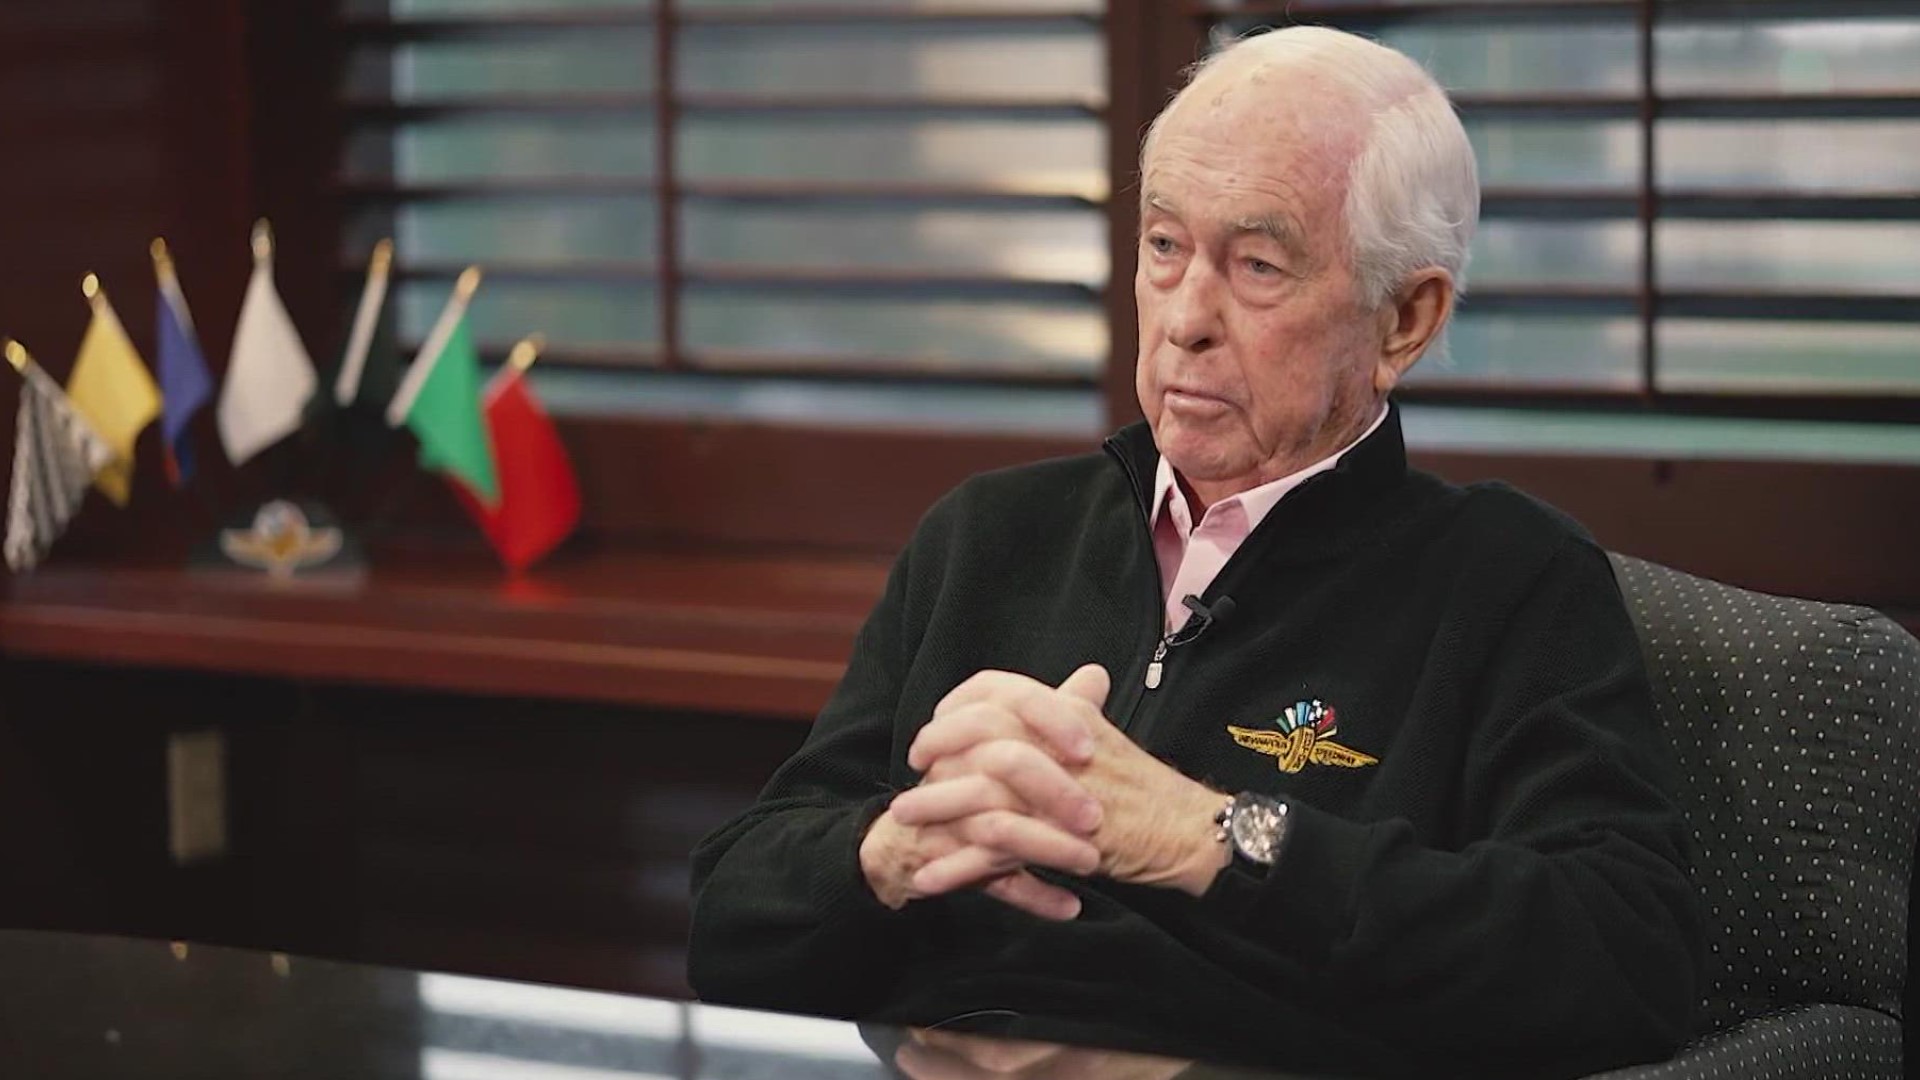 Penske has built a business empire, and the Indianapolis Motor Speedway is at the top of it.